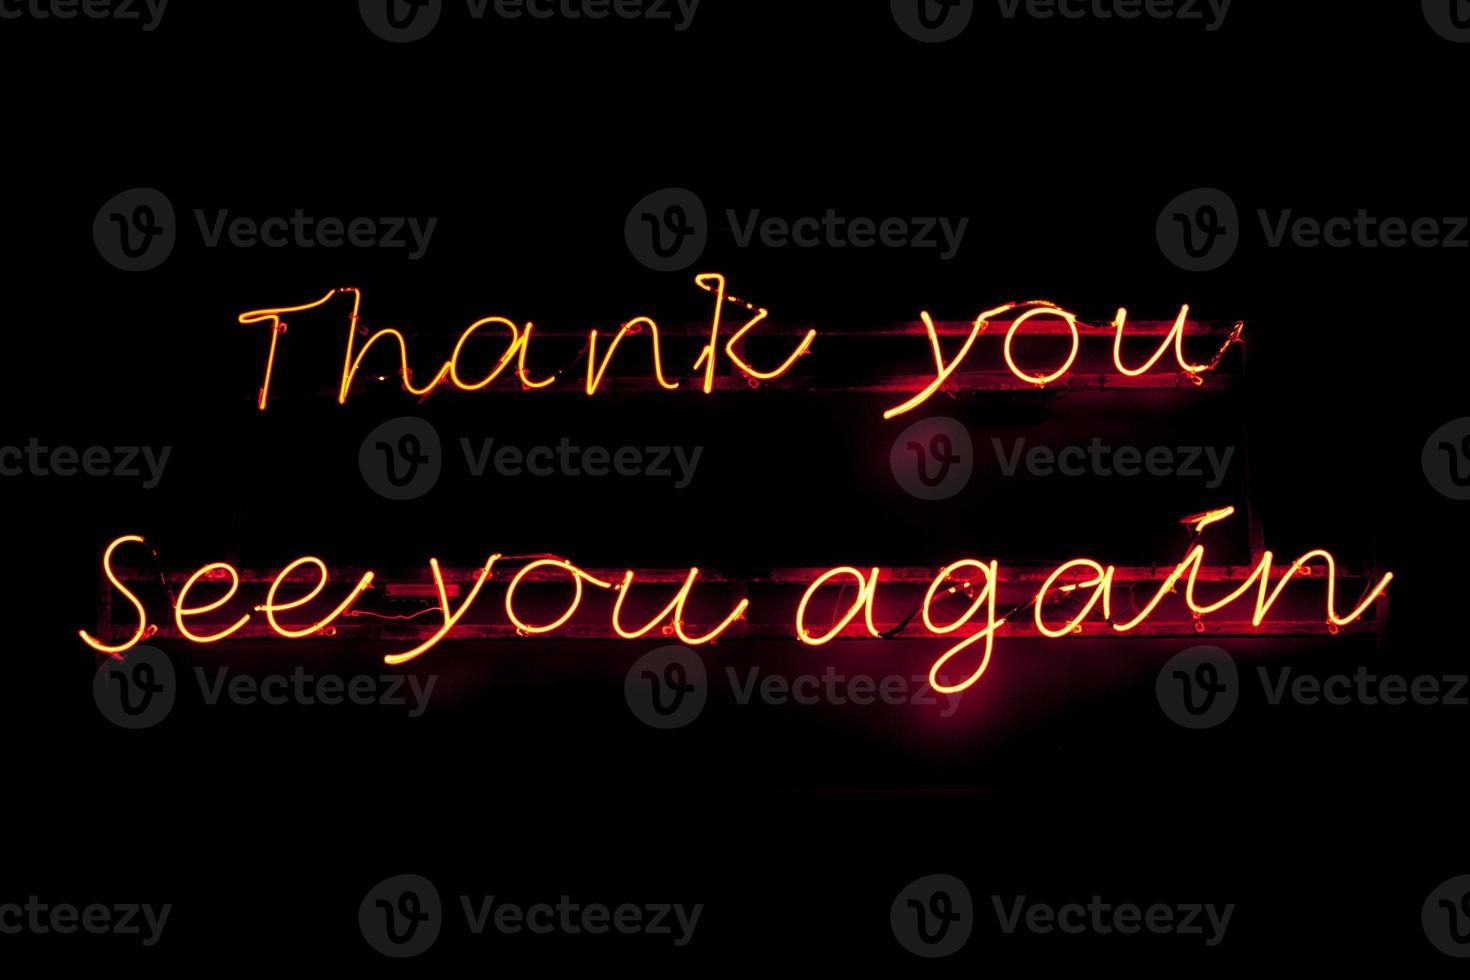 Thank you See you again - Neon light photo